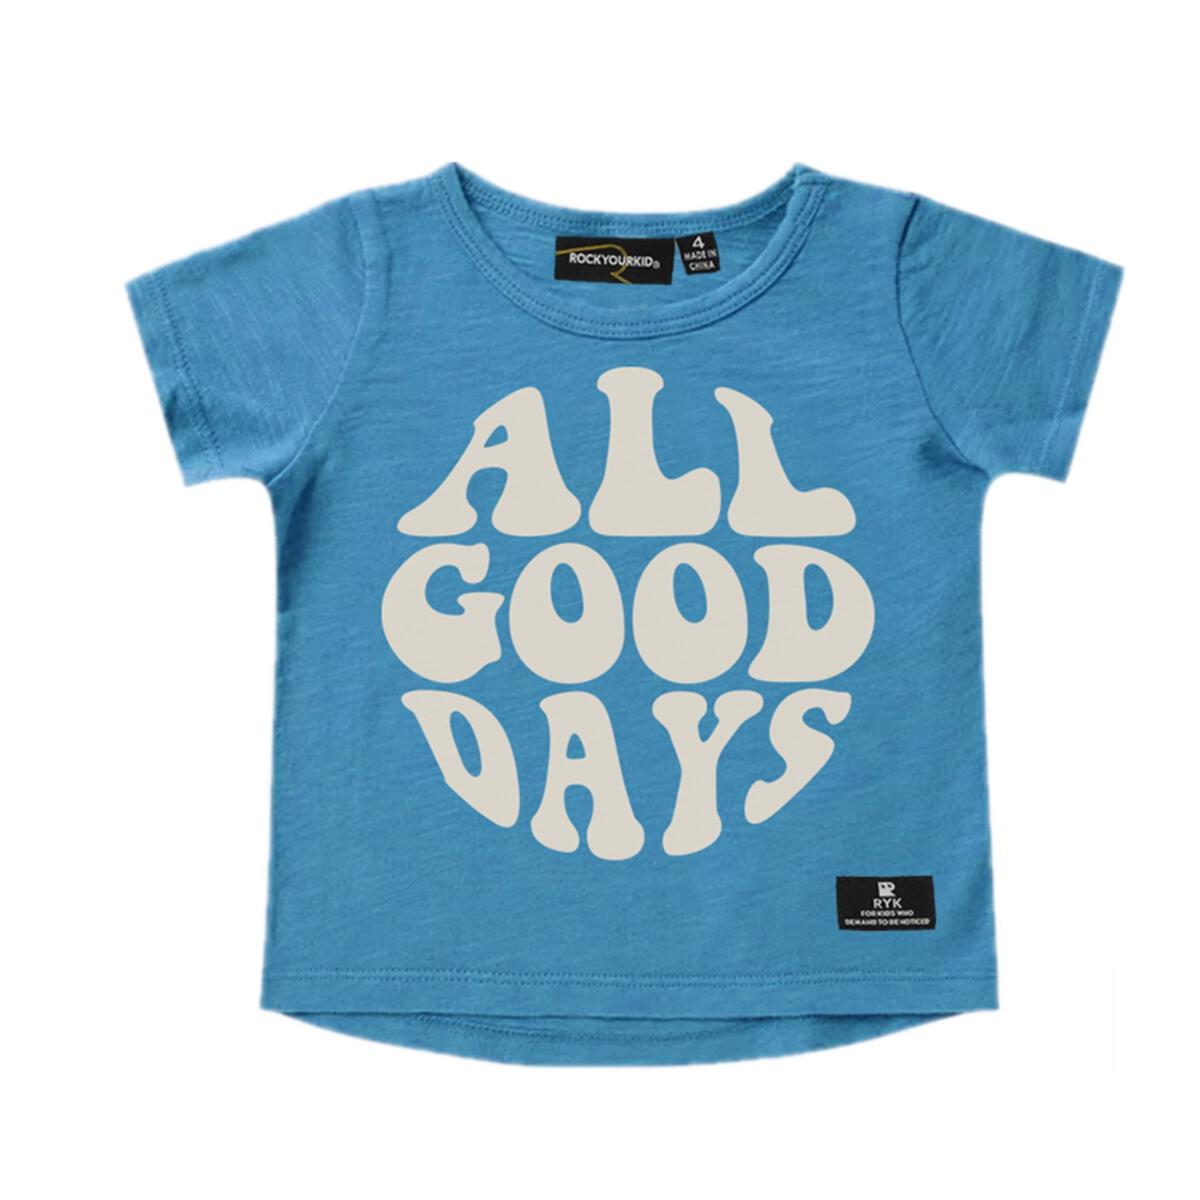 ALL GOOD DAYS TSHIRT (PREORDER) - ROCK YOUR BABY